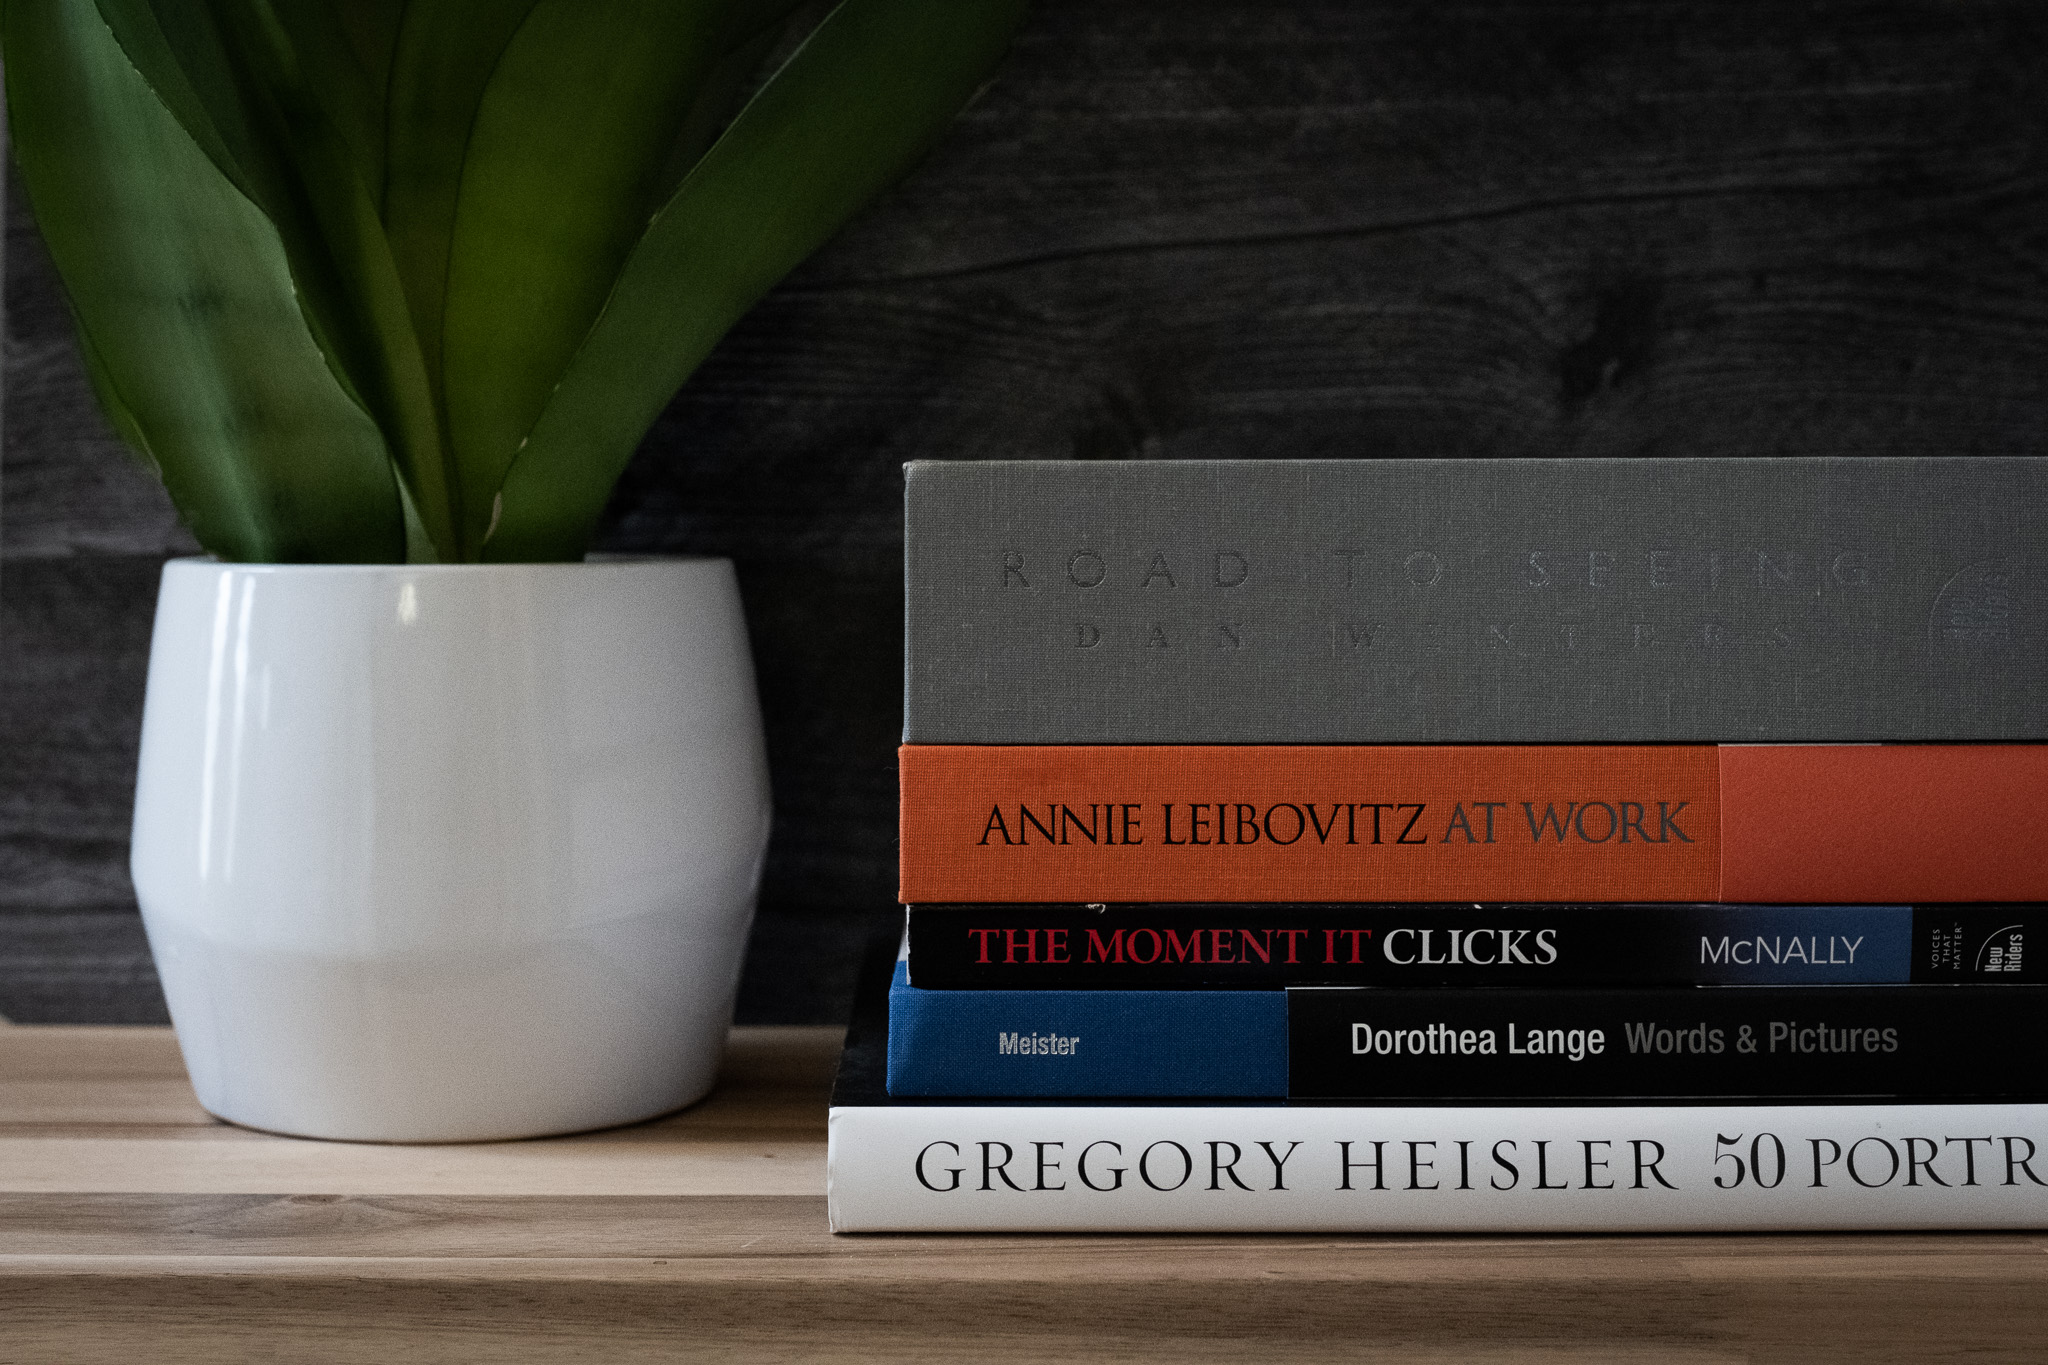 The Best Self-Growth Books for Changing Your Life and Perspective